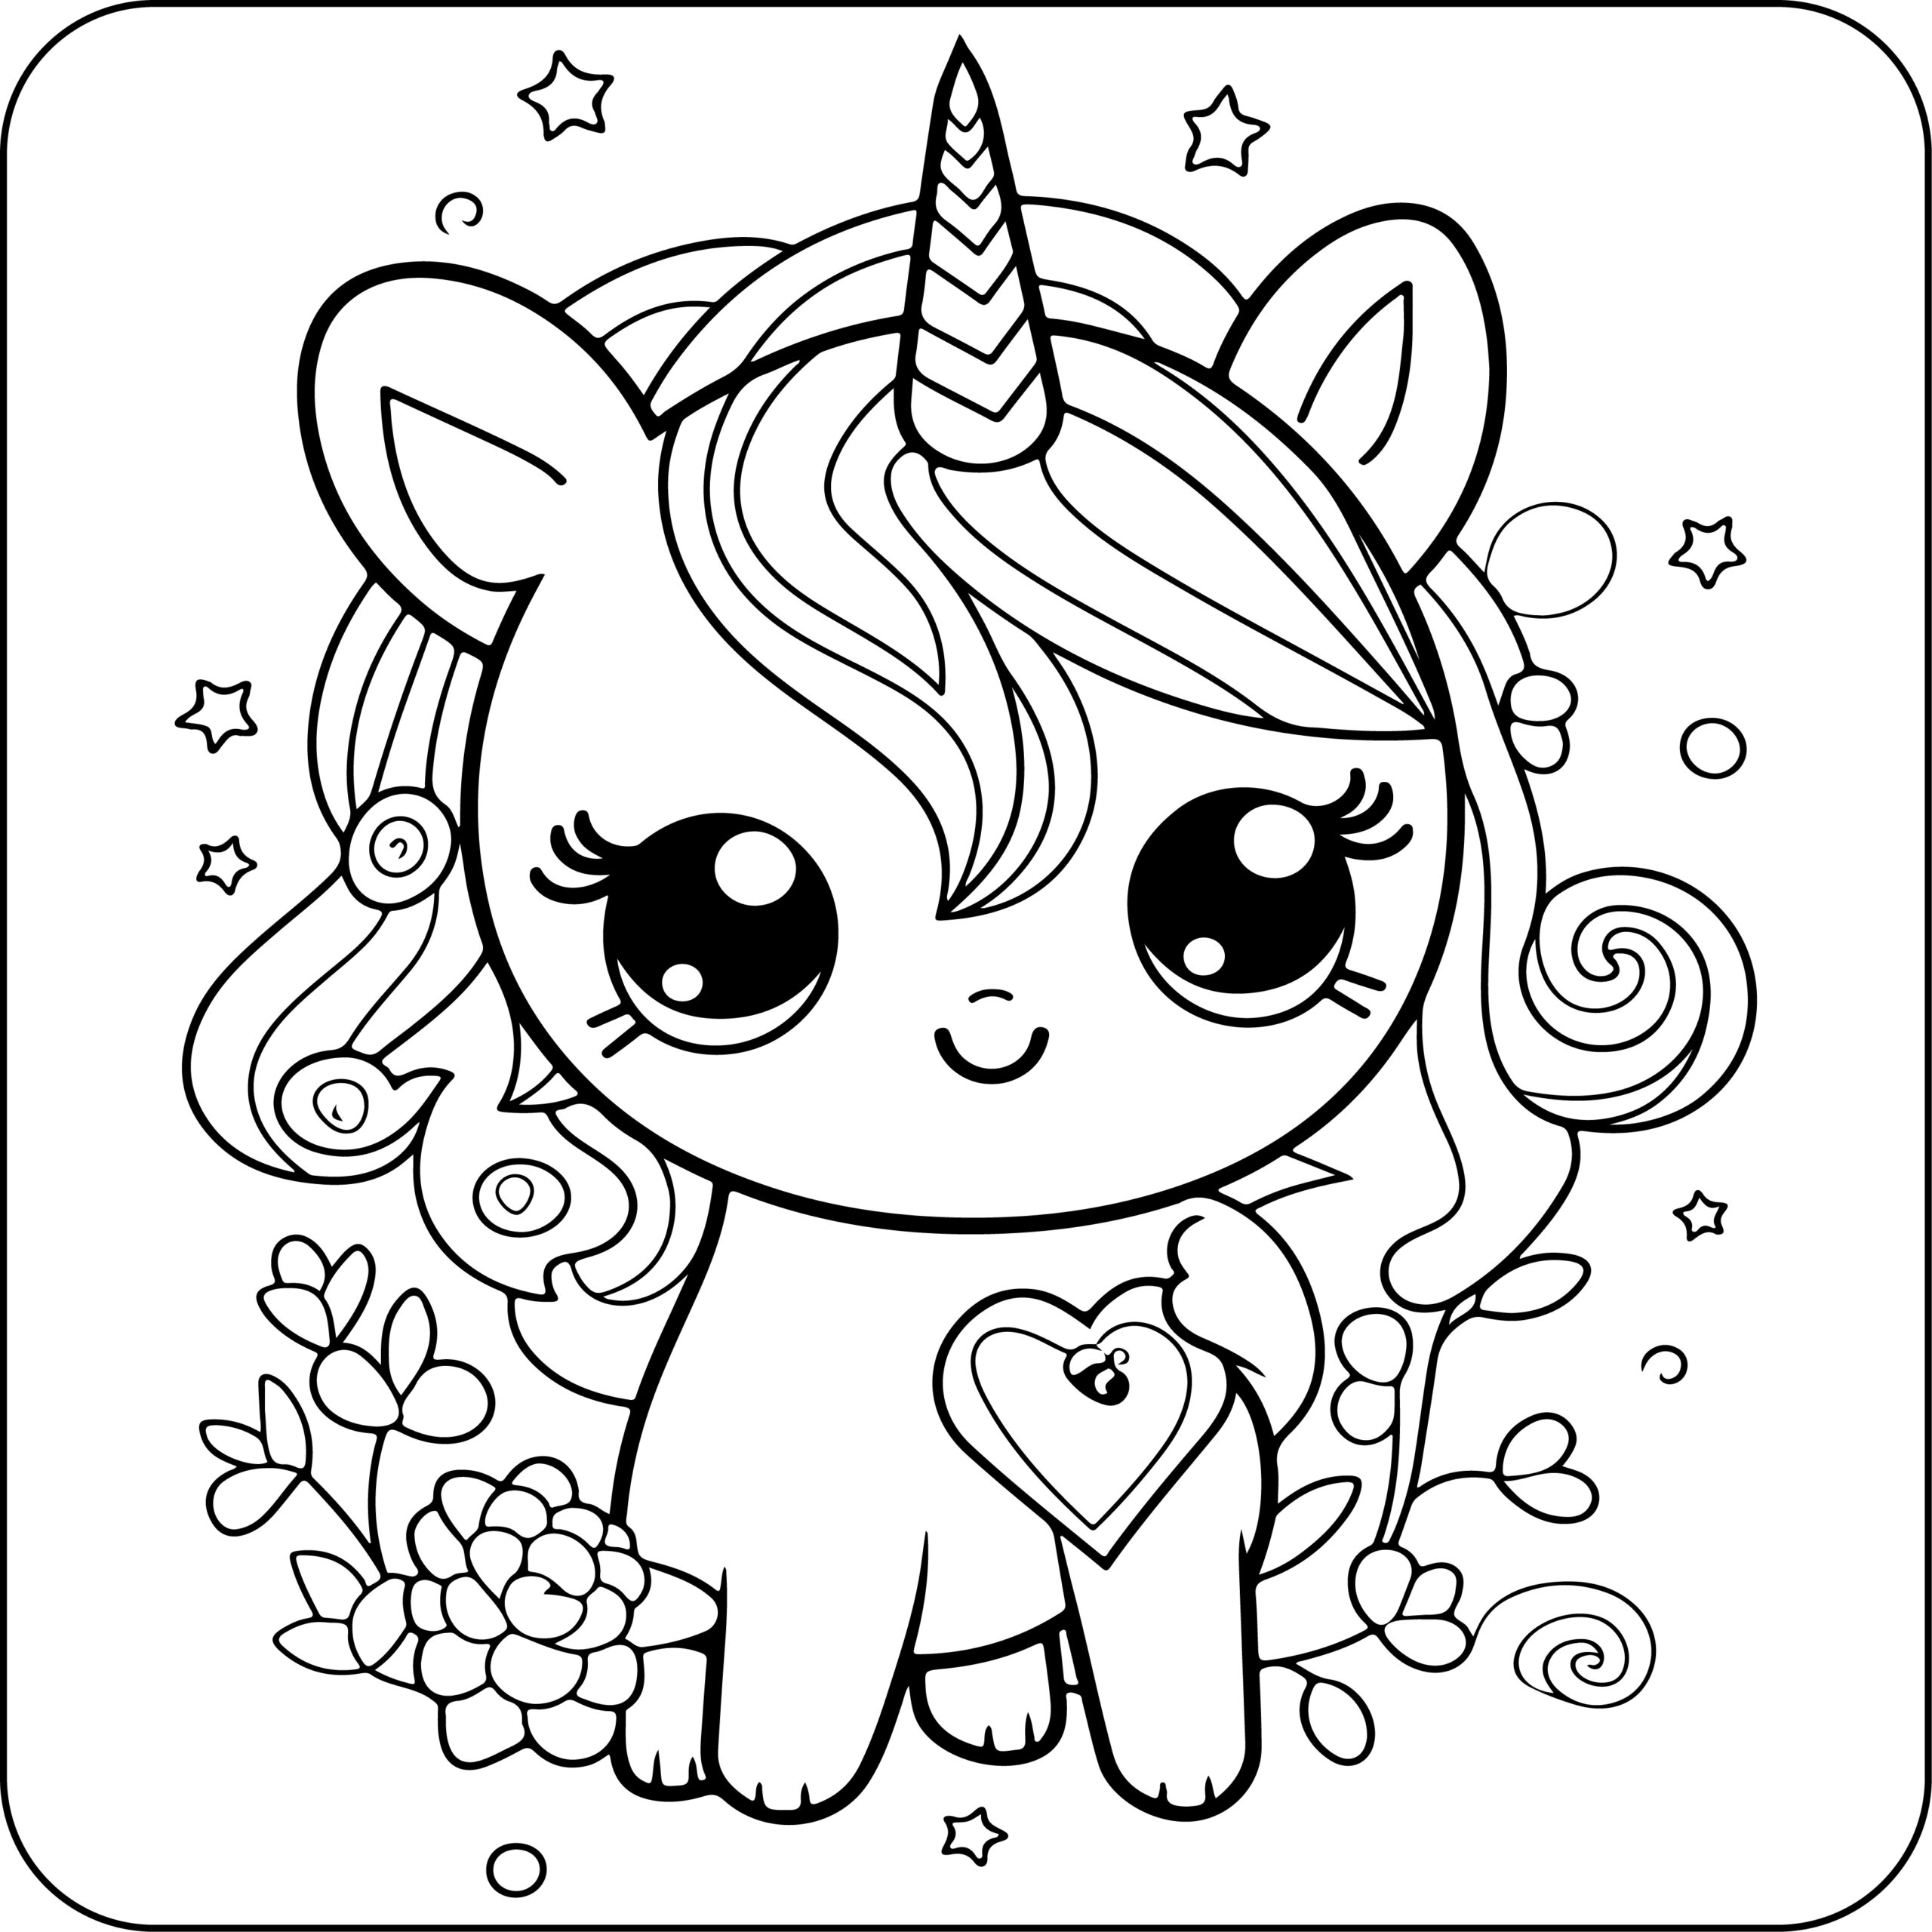 Unicorn coloring book coloring pages for kids made by teachers